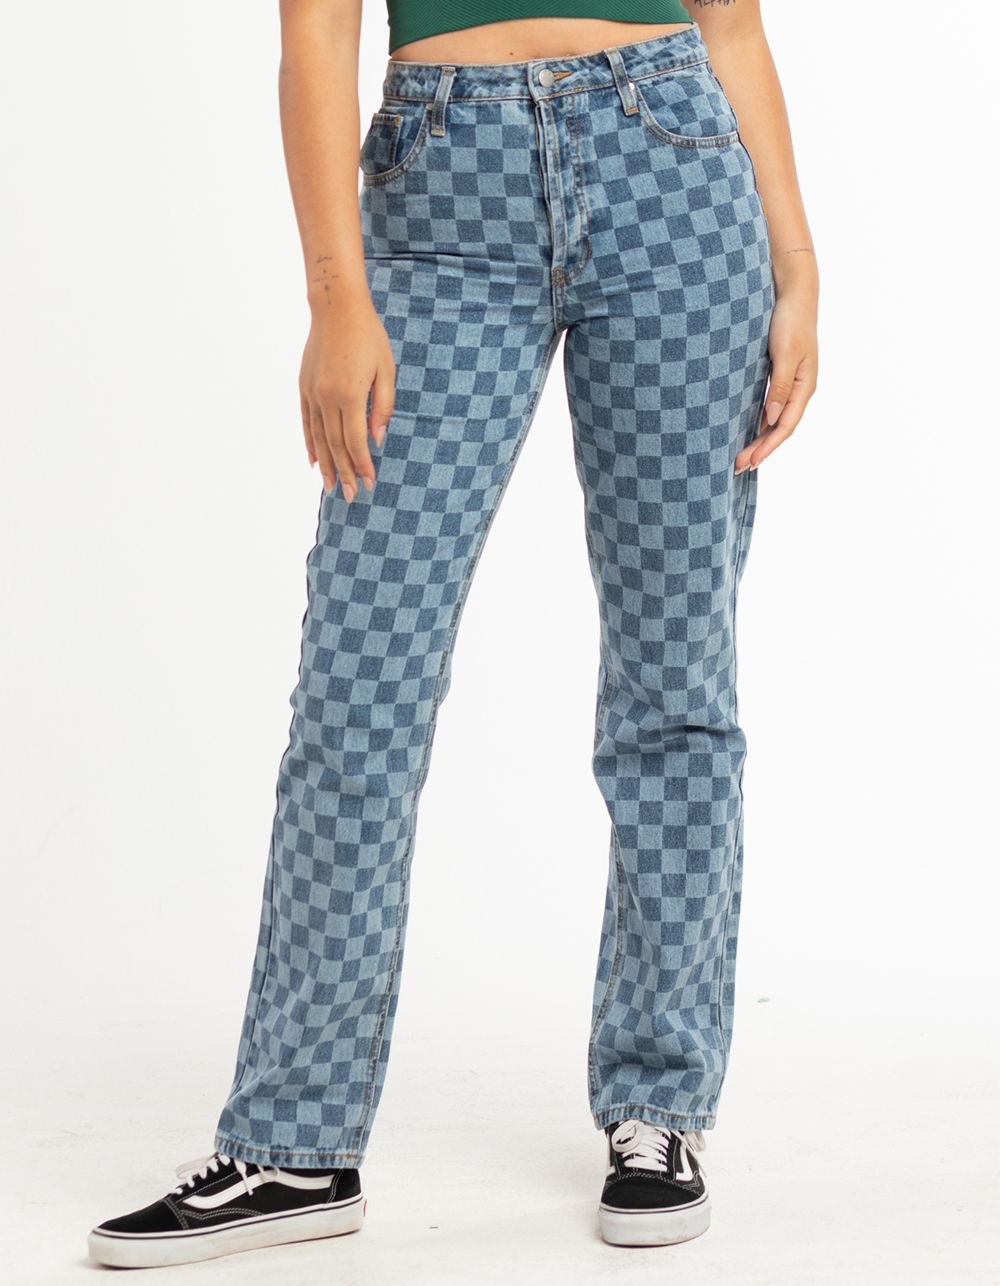 RSQ Checkerboard Womens Jeans - MEDIUM WASH | Tillys | Tillys